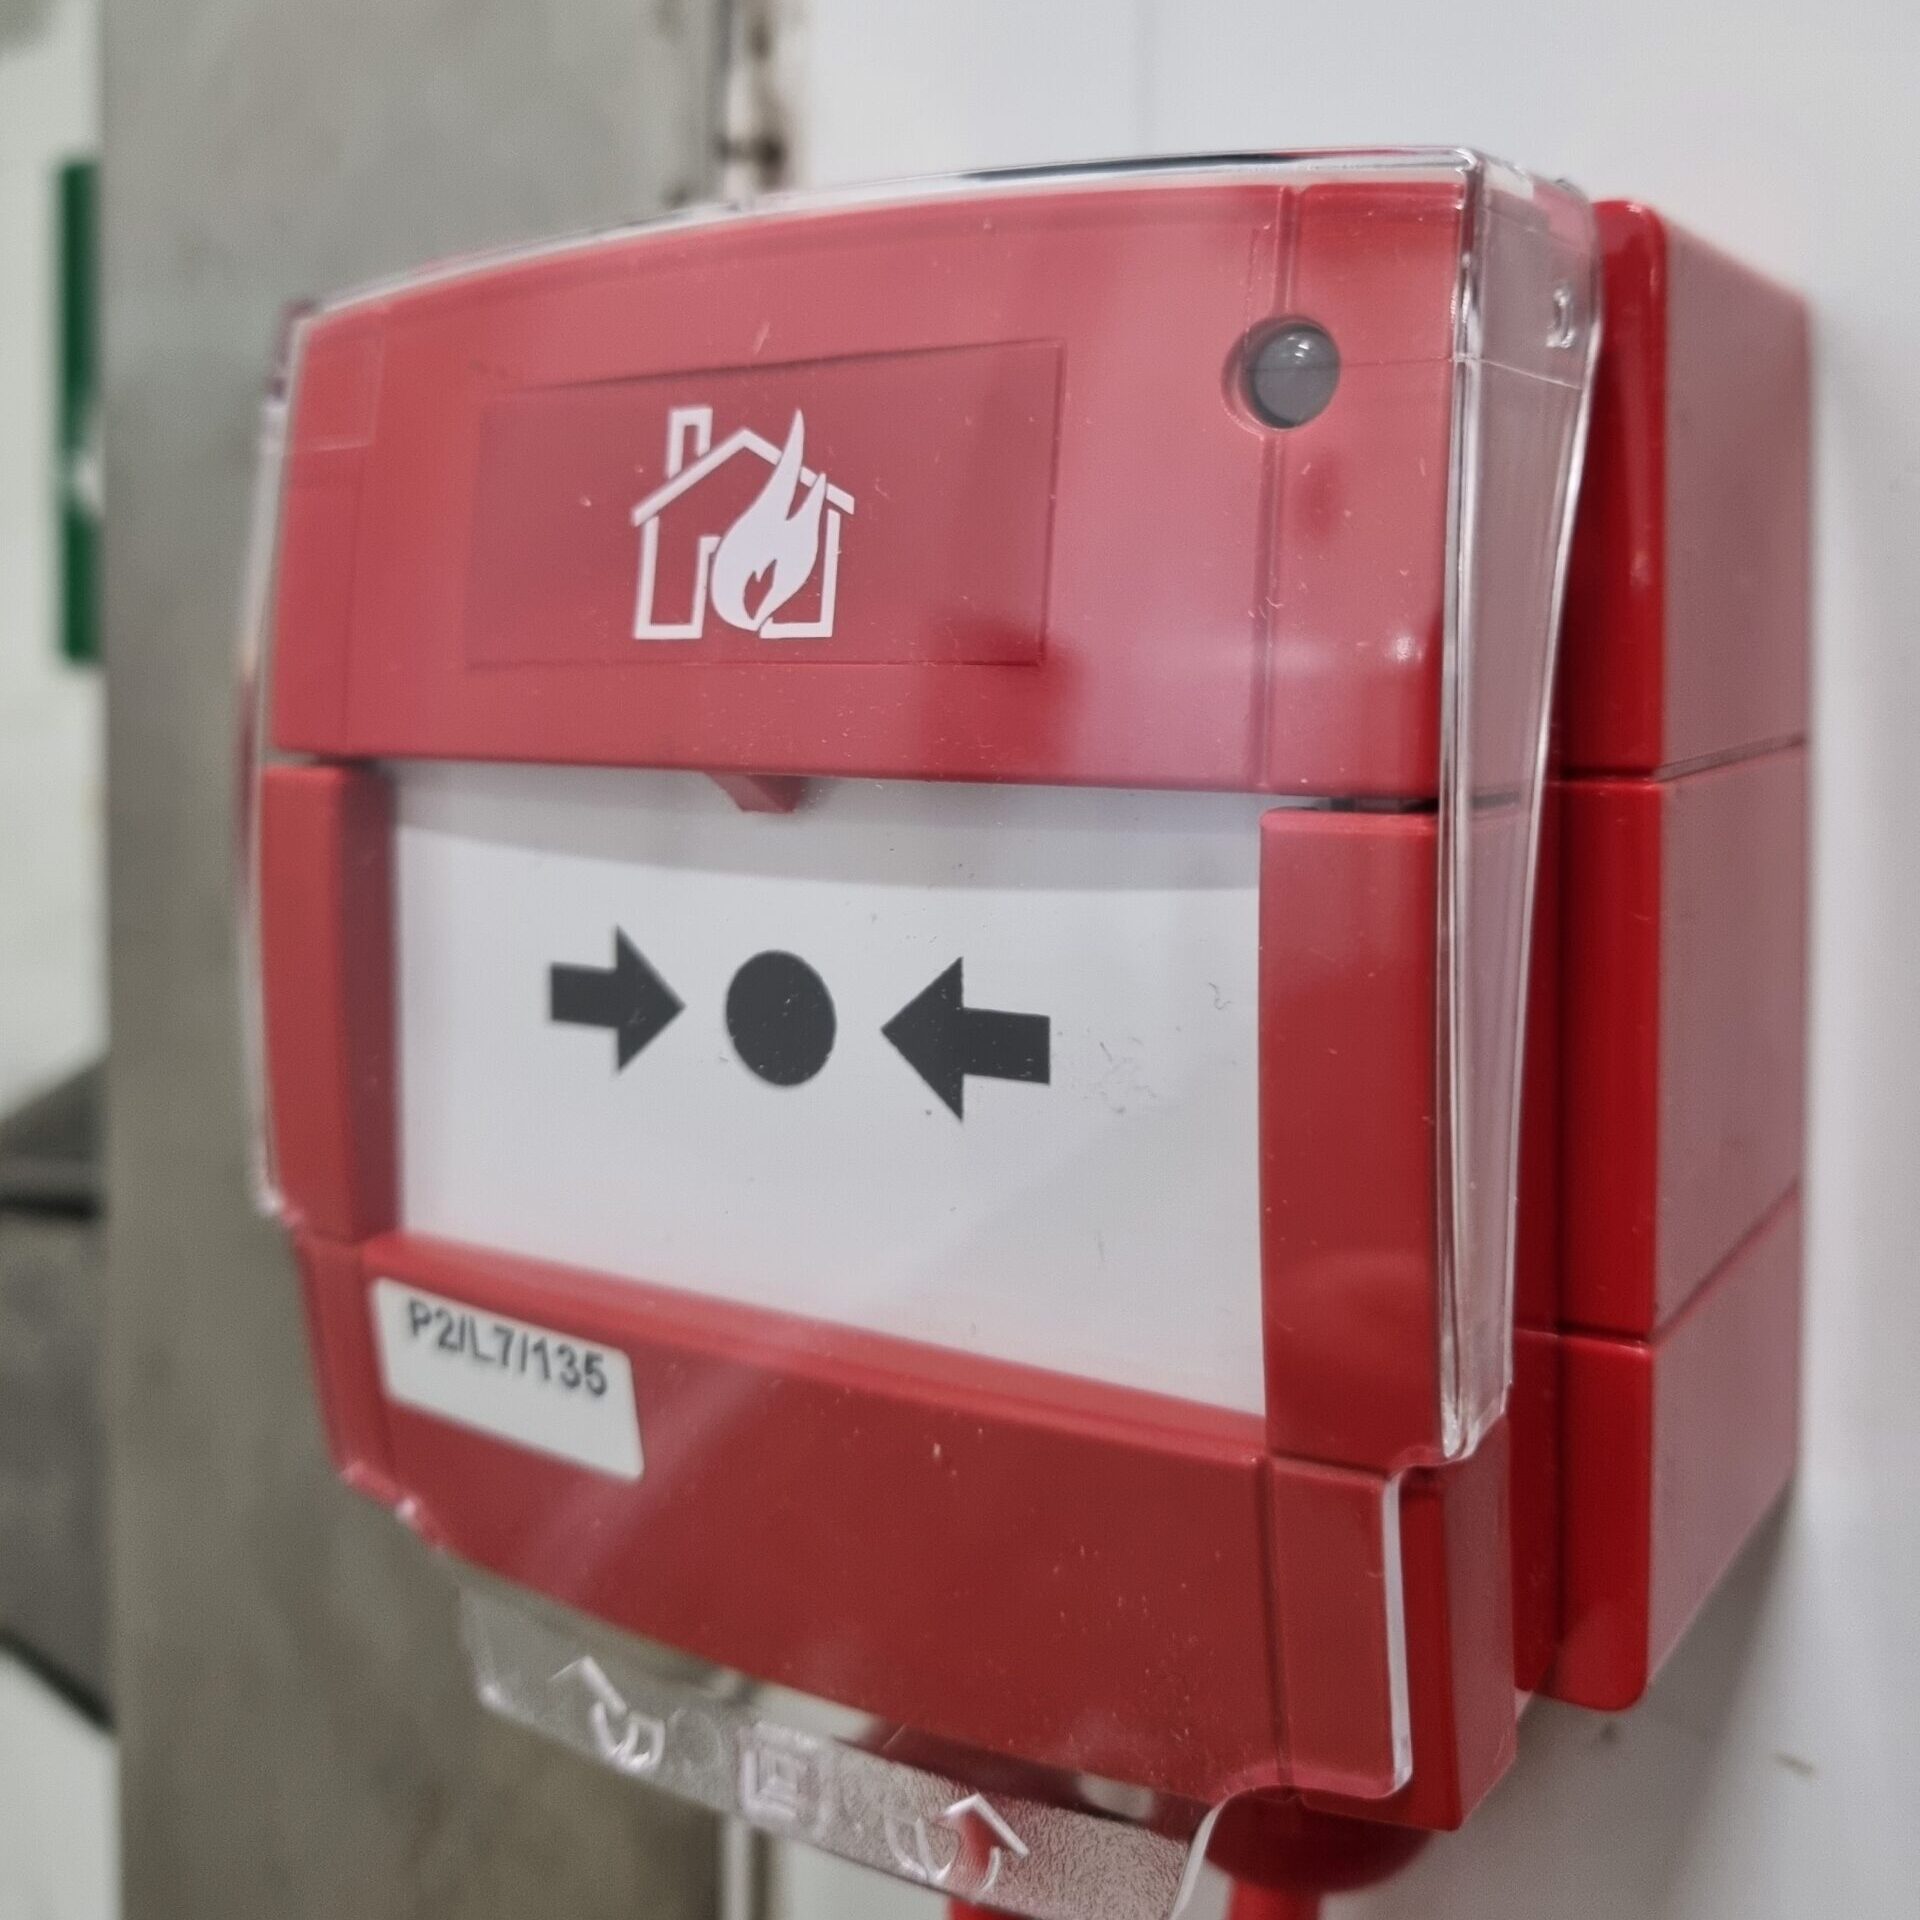 A red manual call point to press in the event of a fire